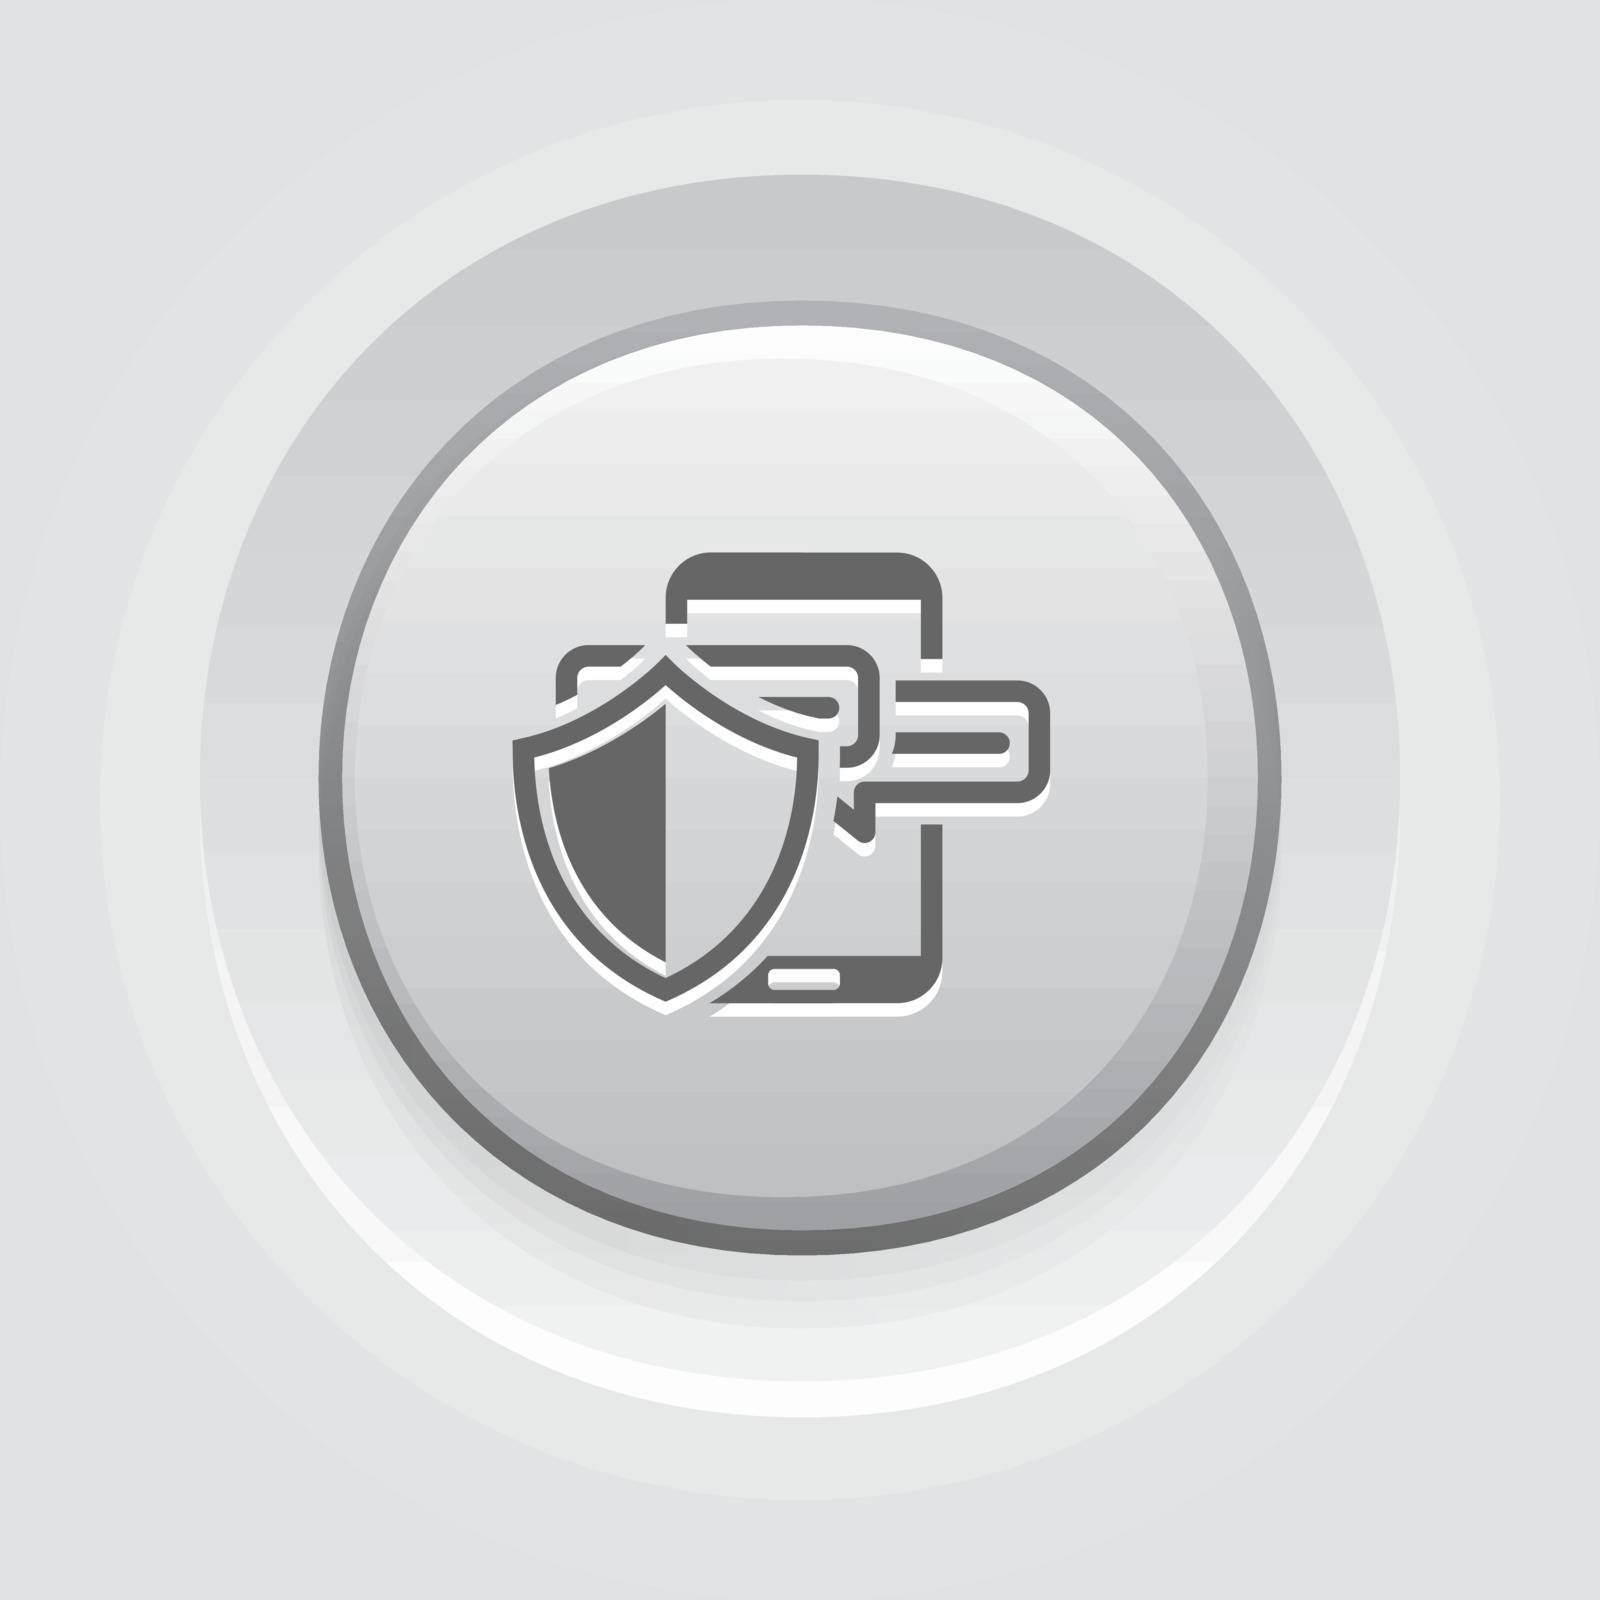 Safety Messaging Icon. Flat Design. Business Concept Grey Button Design